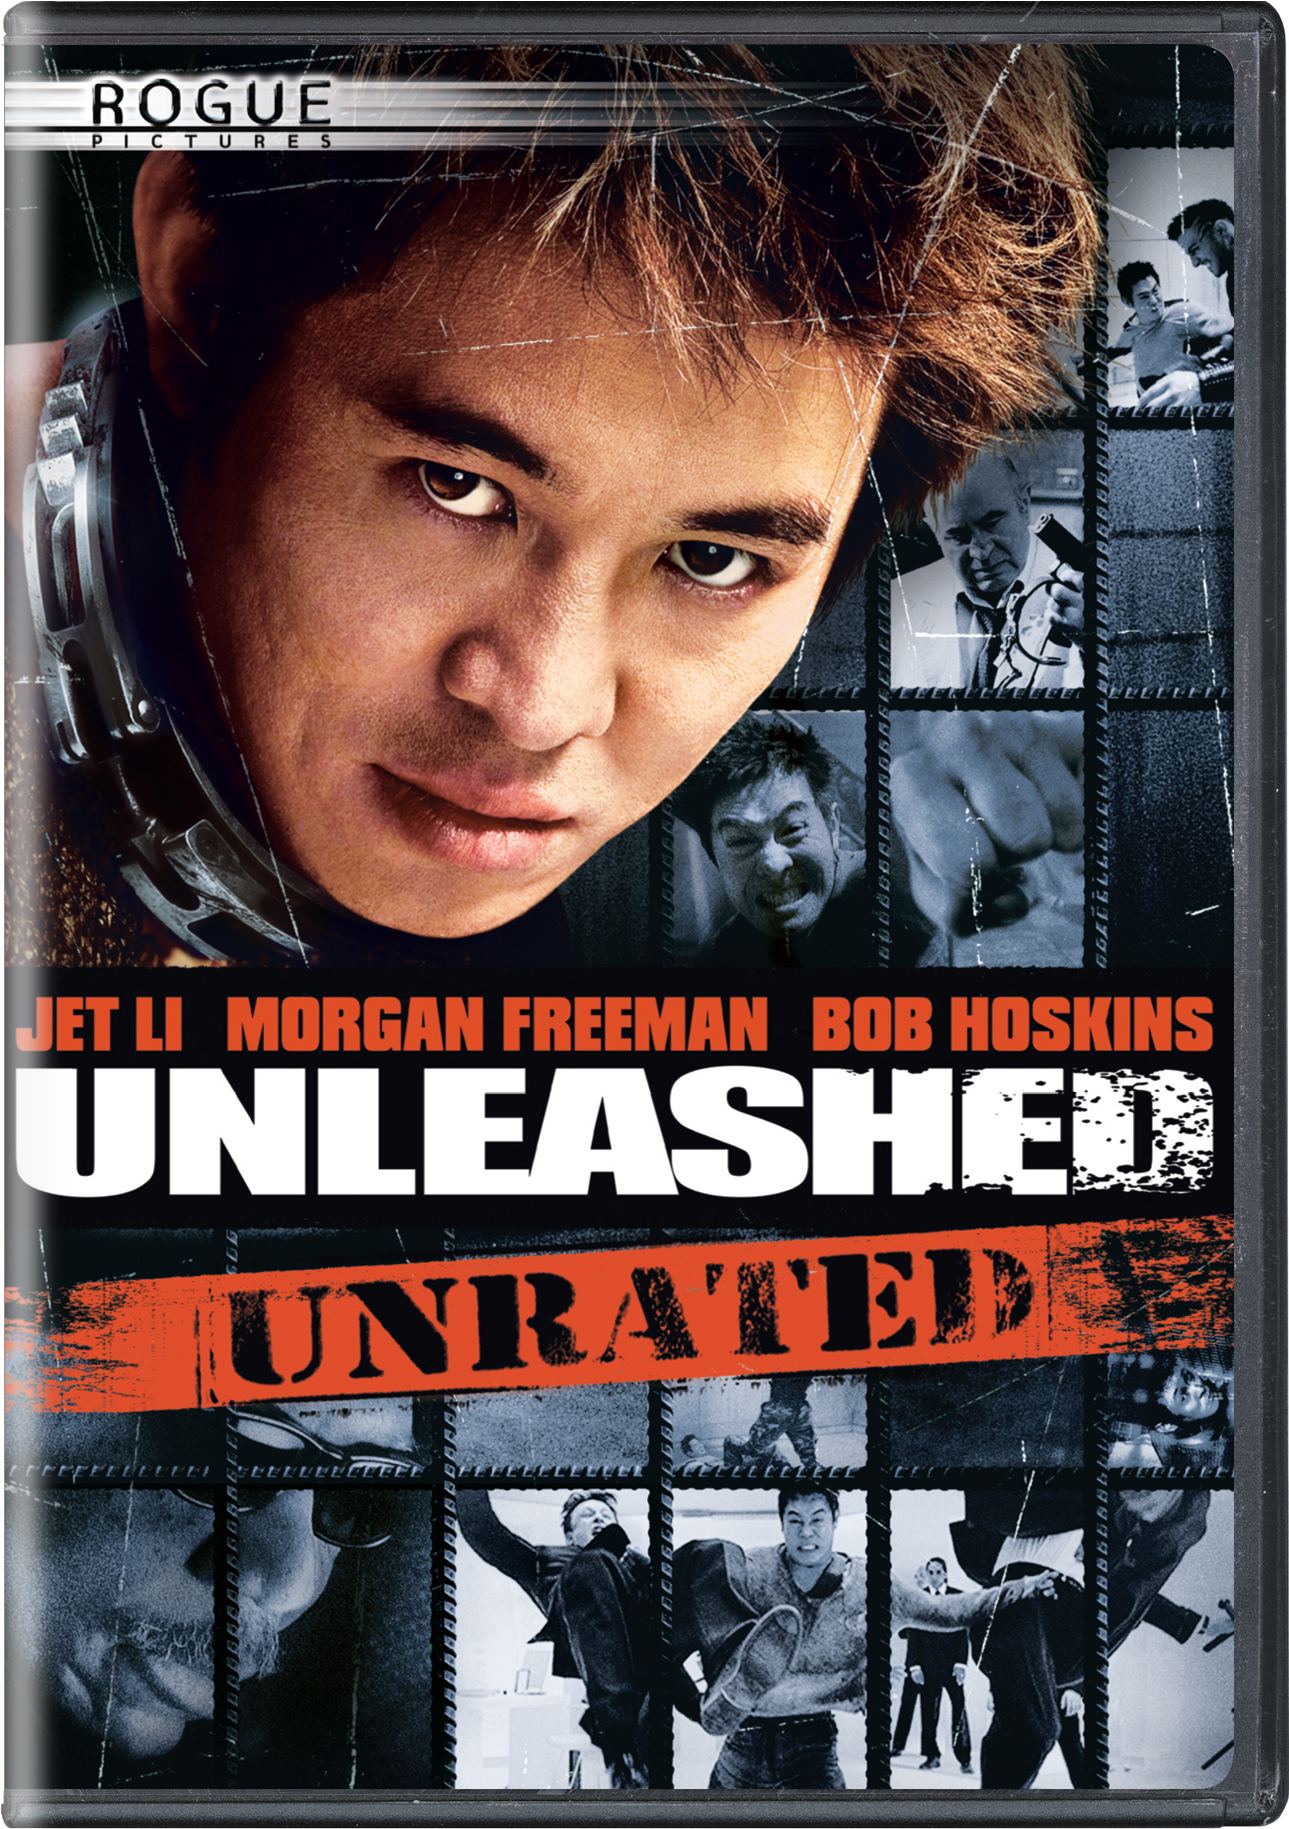 Unleashed (DVD Unrated) - DVD [ 2005 ]  - Thriller Movies On DVD - Movies On GRUV